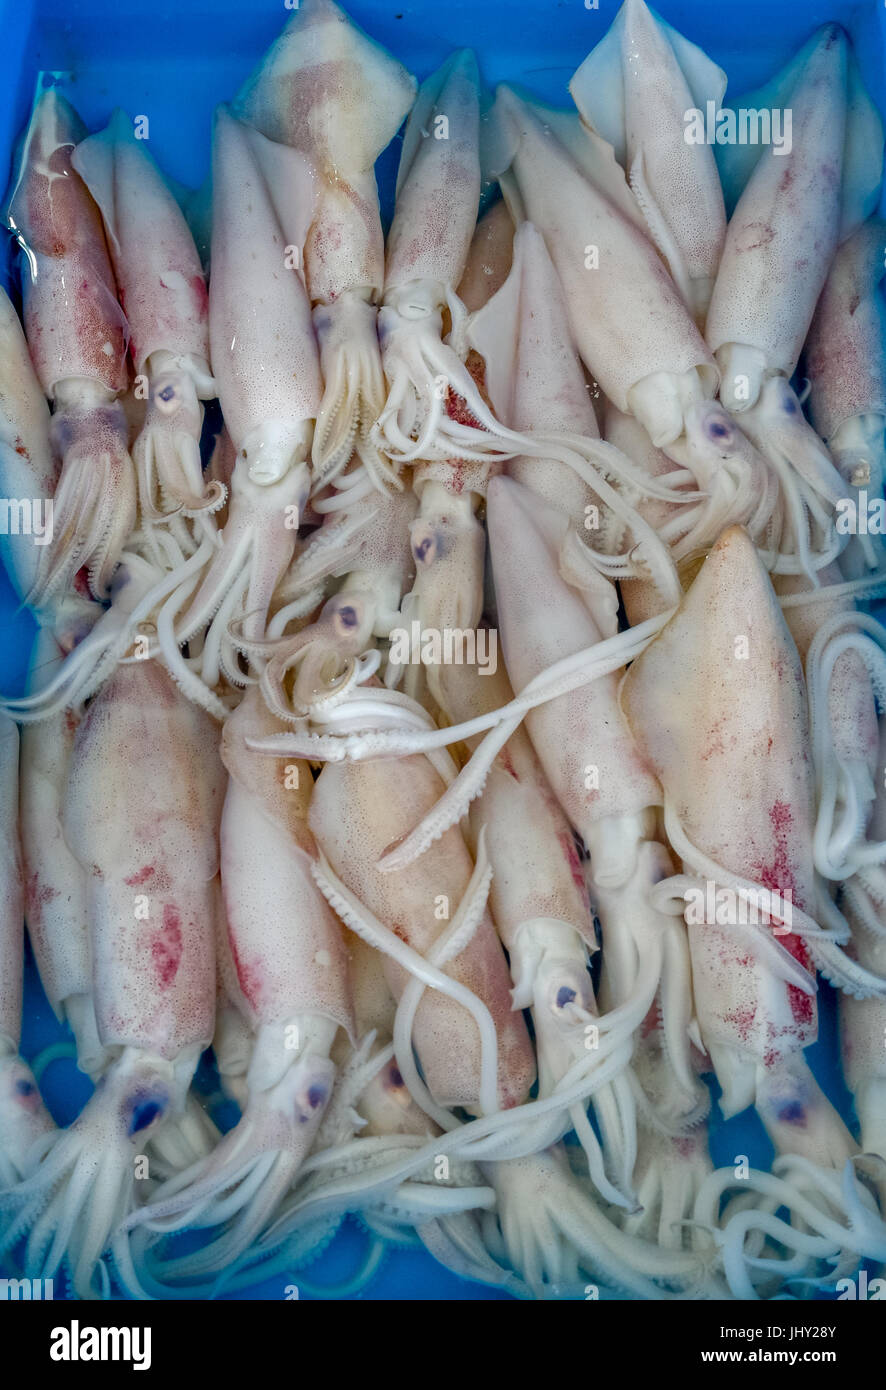 tray of squid seafood catch of the day at seafood market Stock Photo